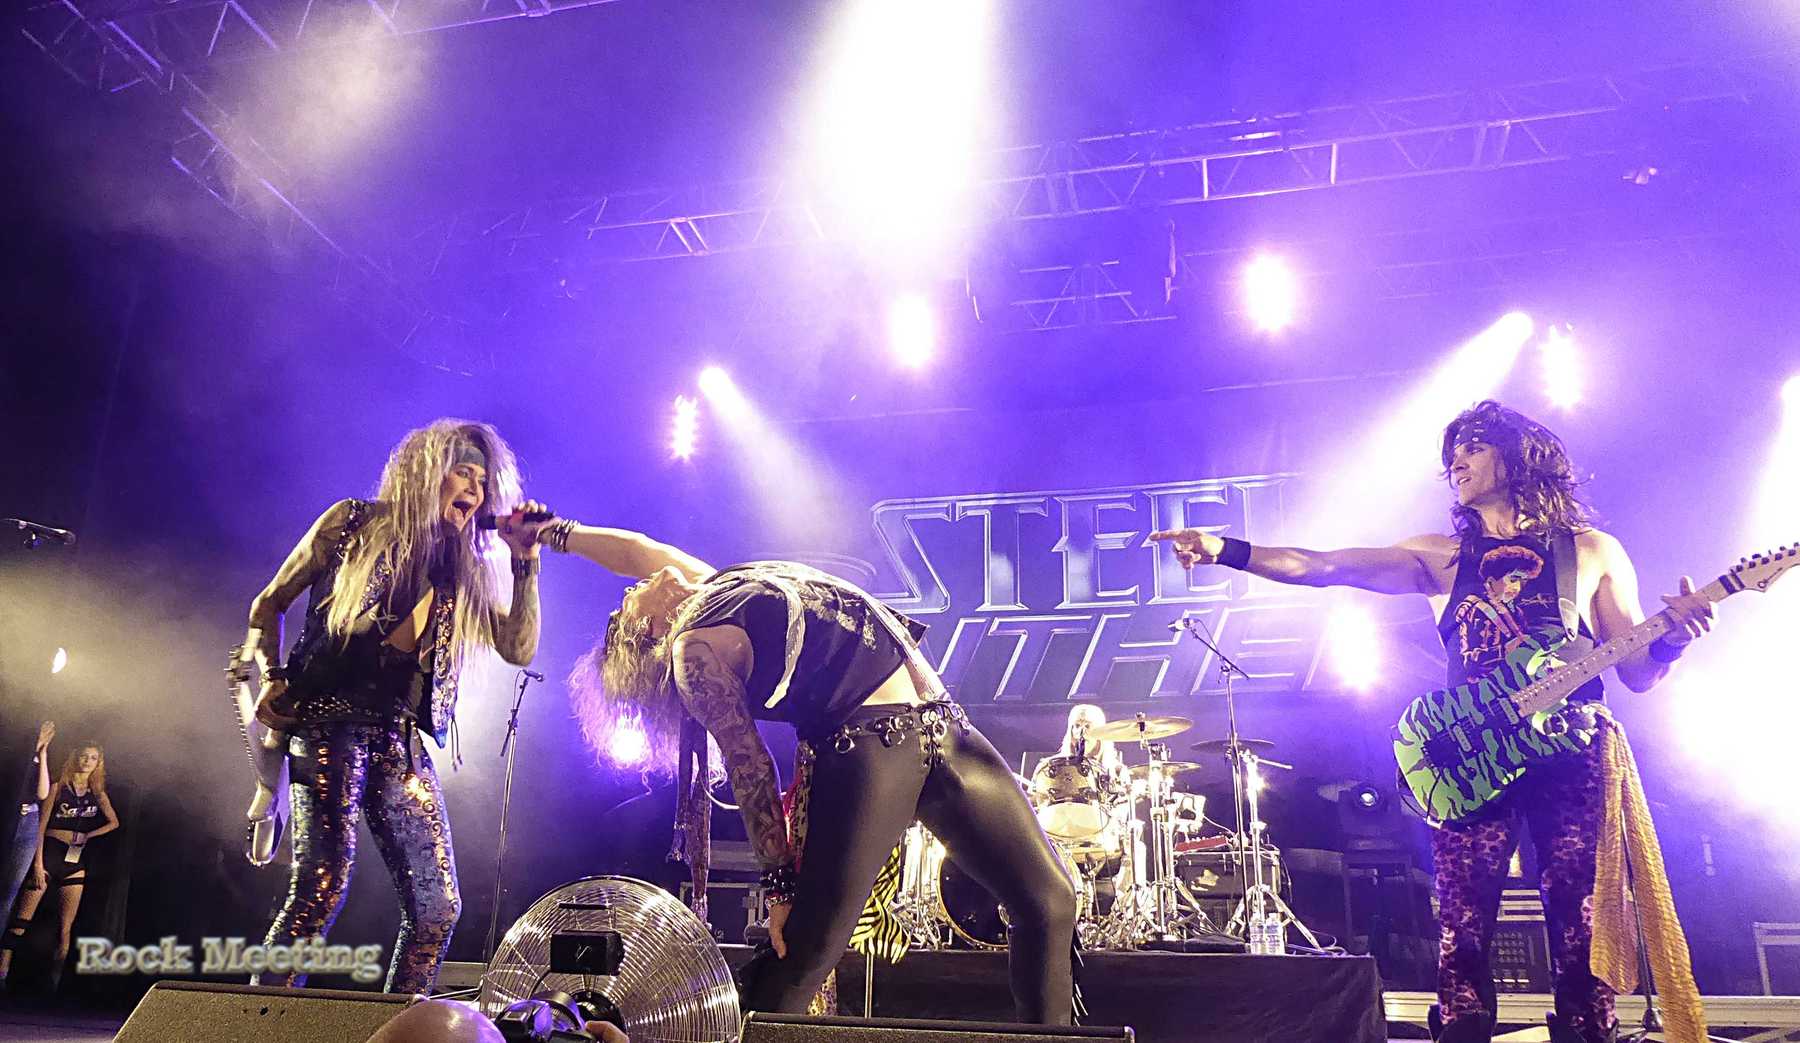 slasher metal fest steel panther leprous toulouse le phare 27 04 2019 P1000970 steel panther.jpg